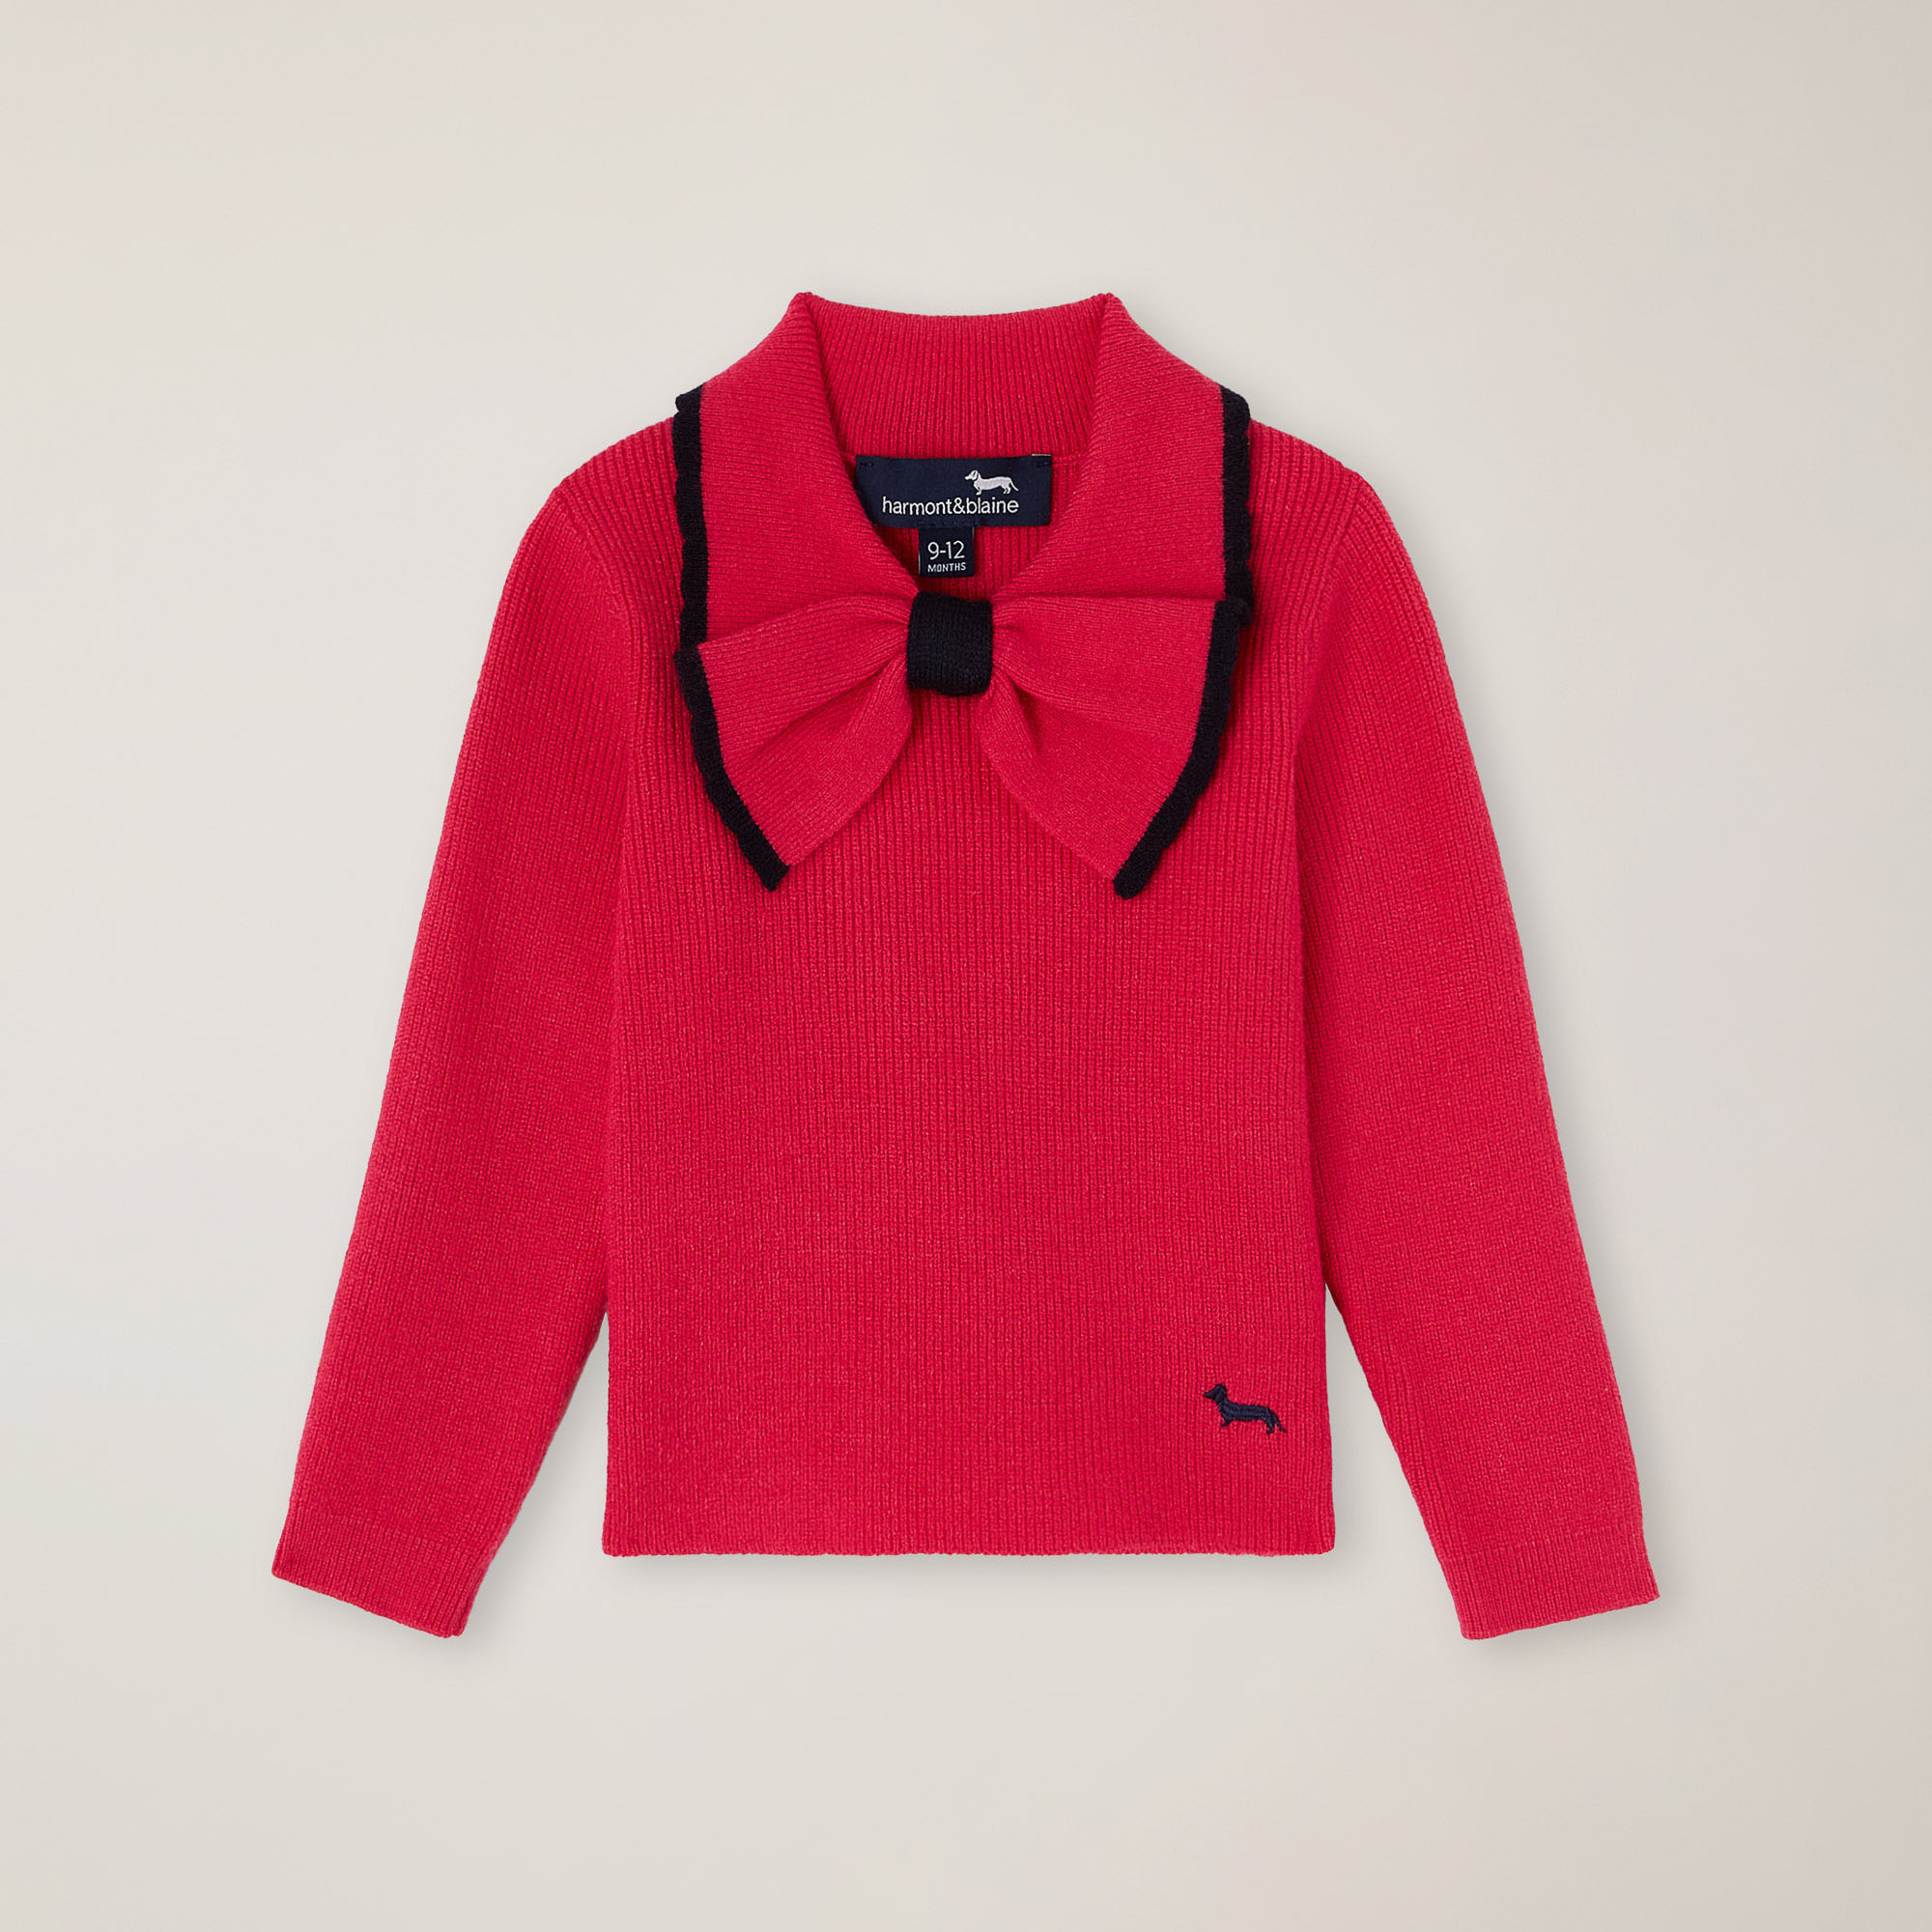 Crew neck with bow collar